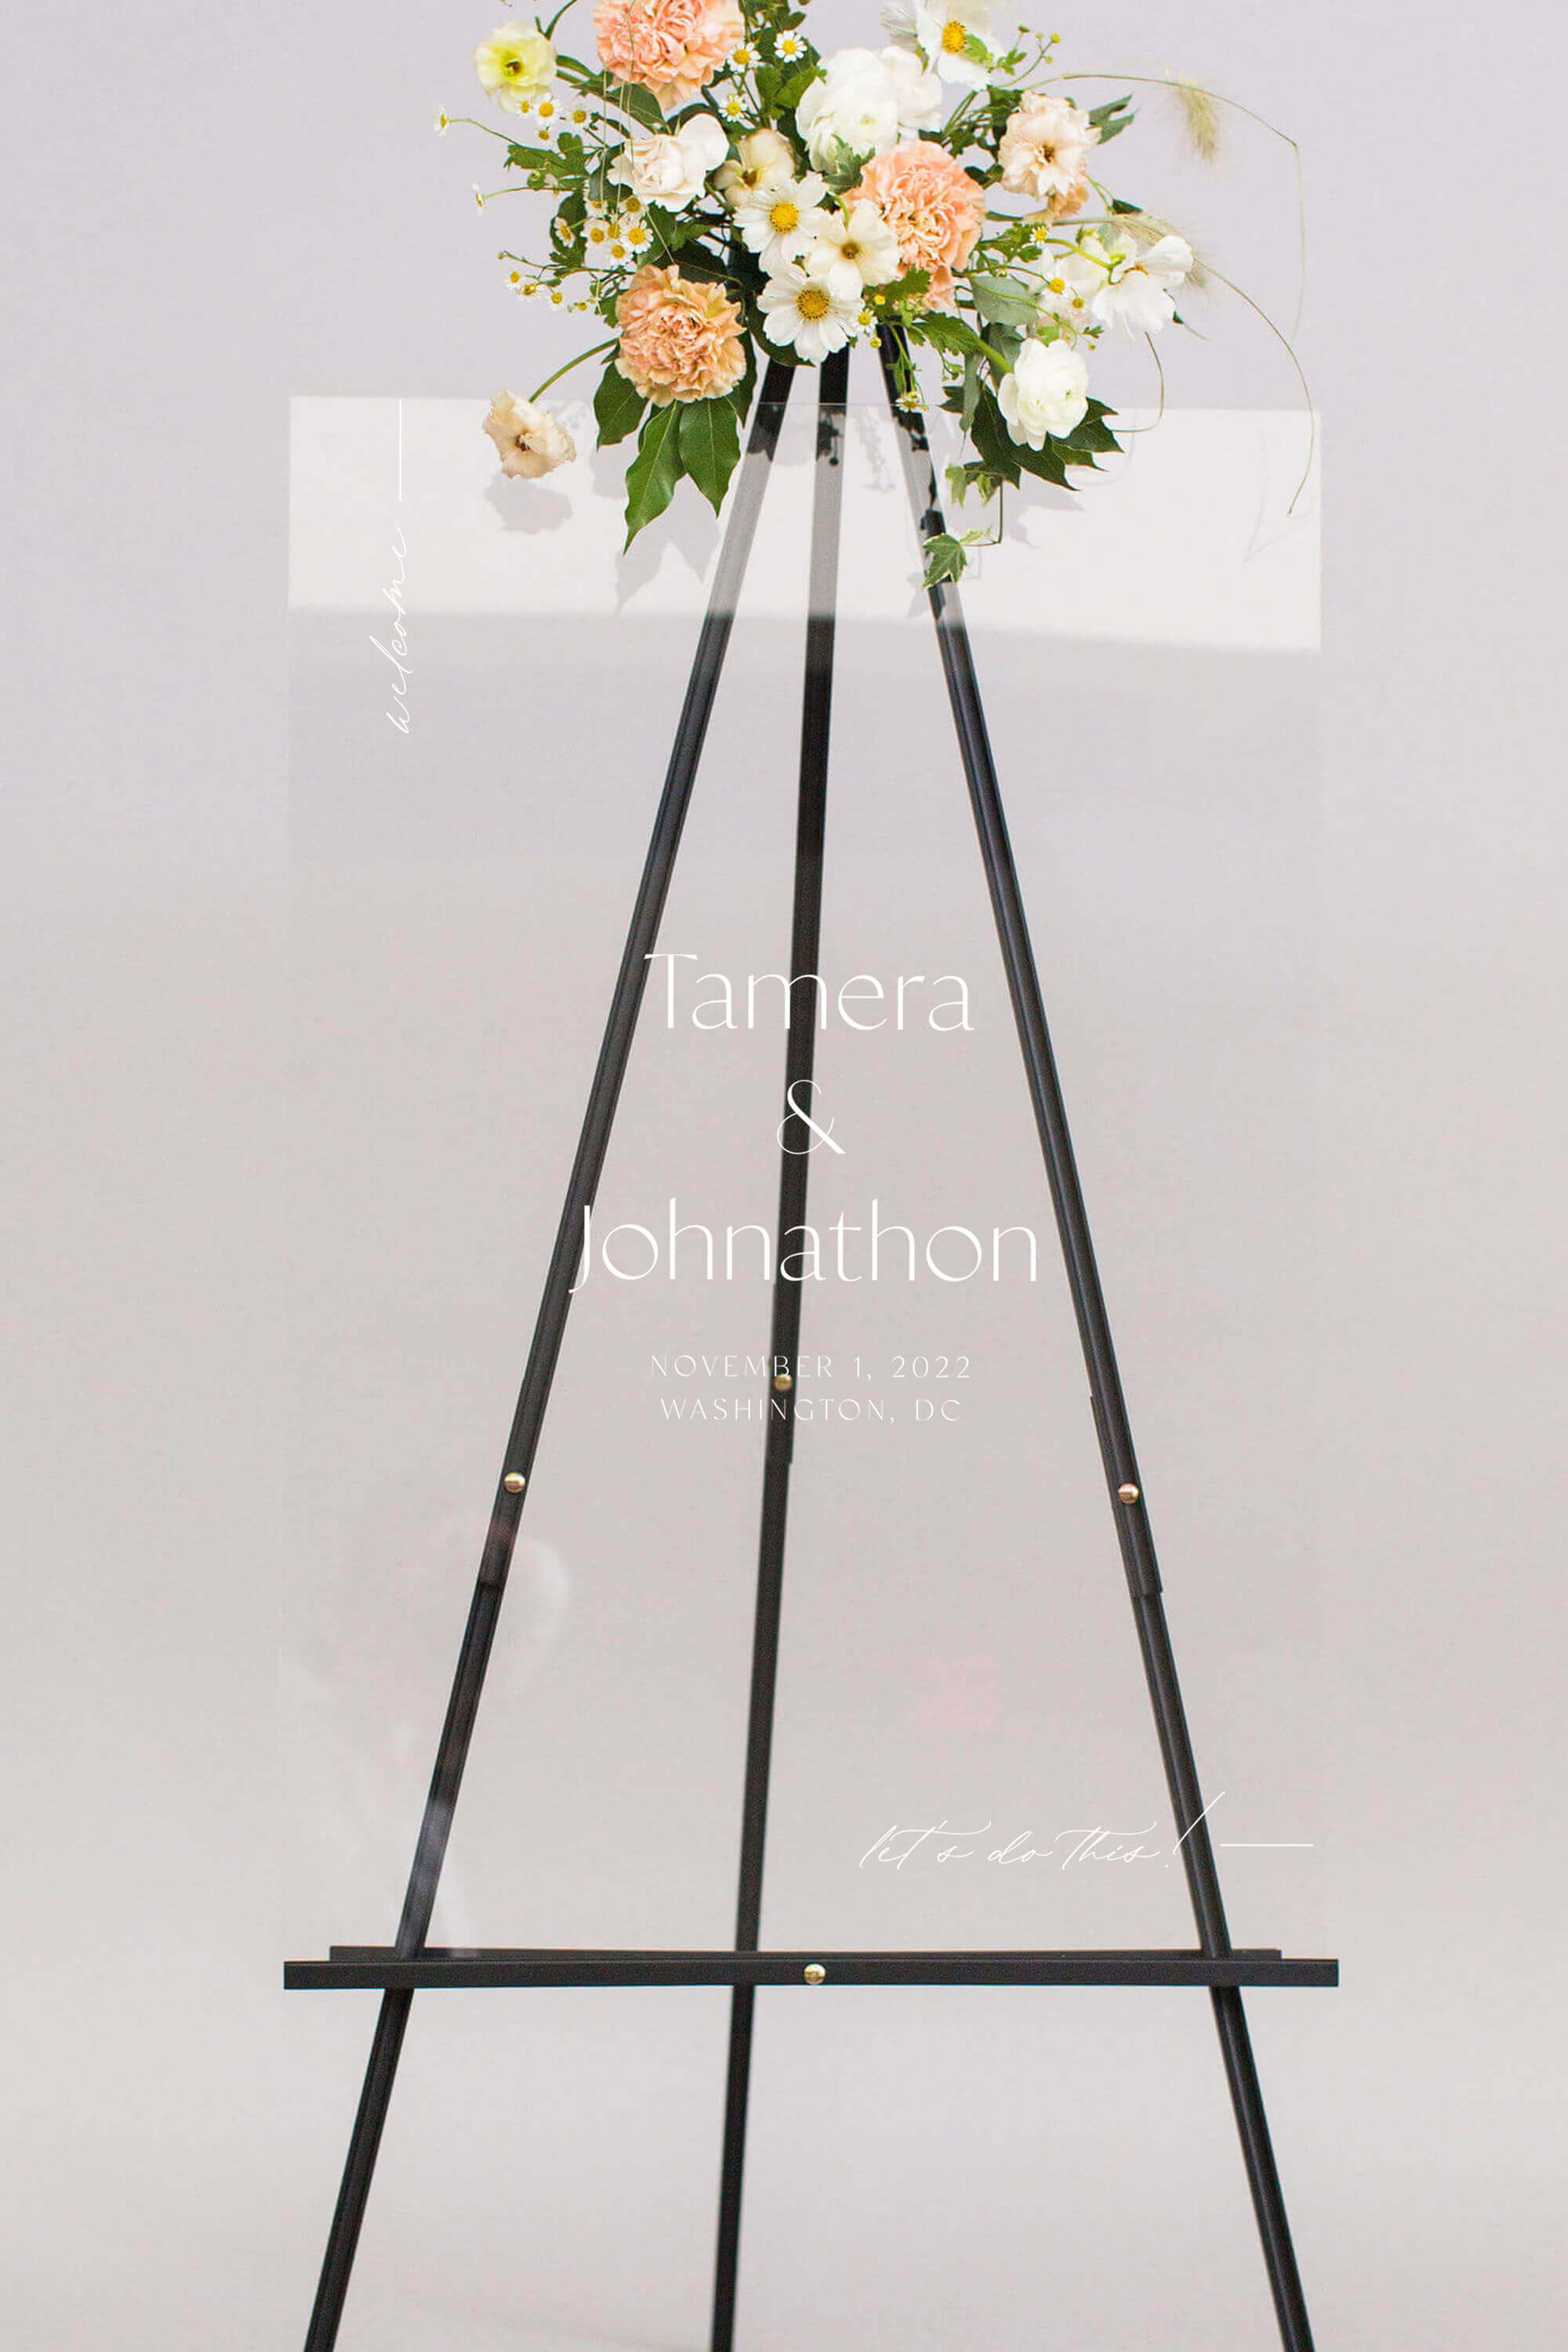 Where to Buy an Easel for Wedding Sign